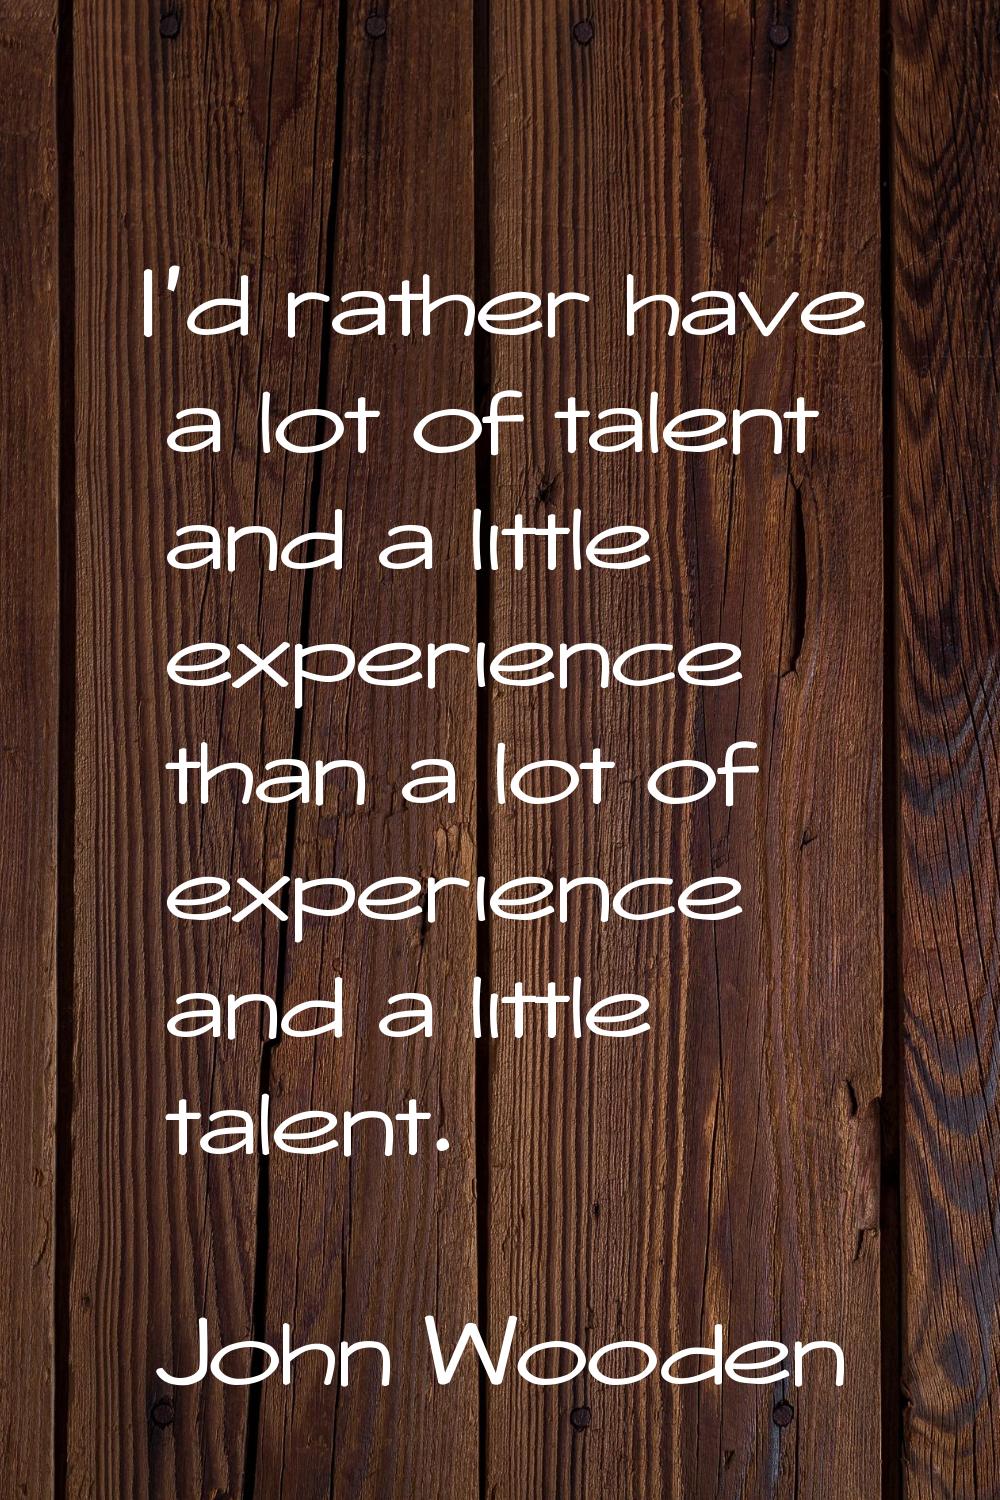 I'd rather have a lot of talent and a little experience than a lot of experience and a little talen